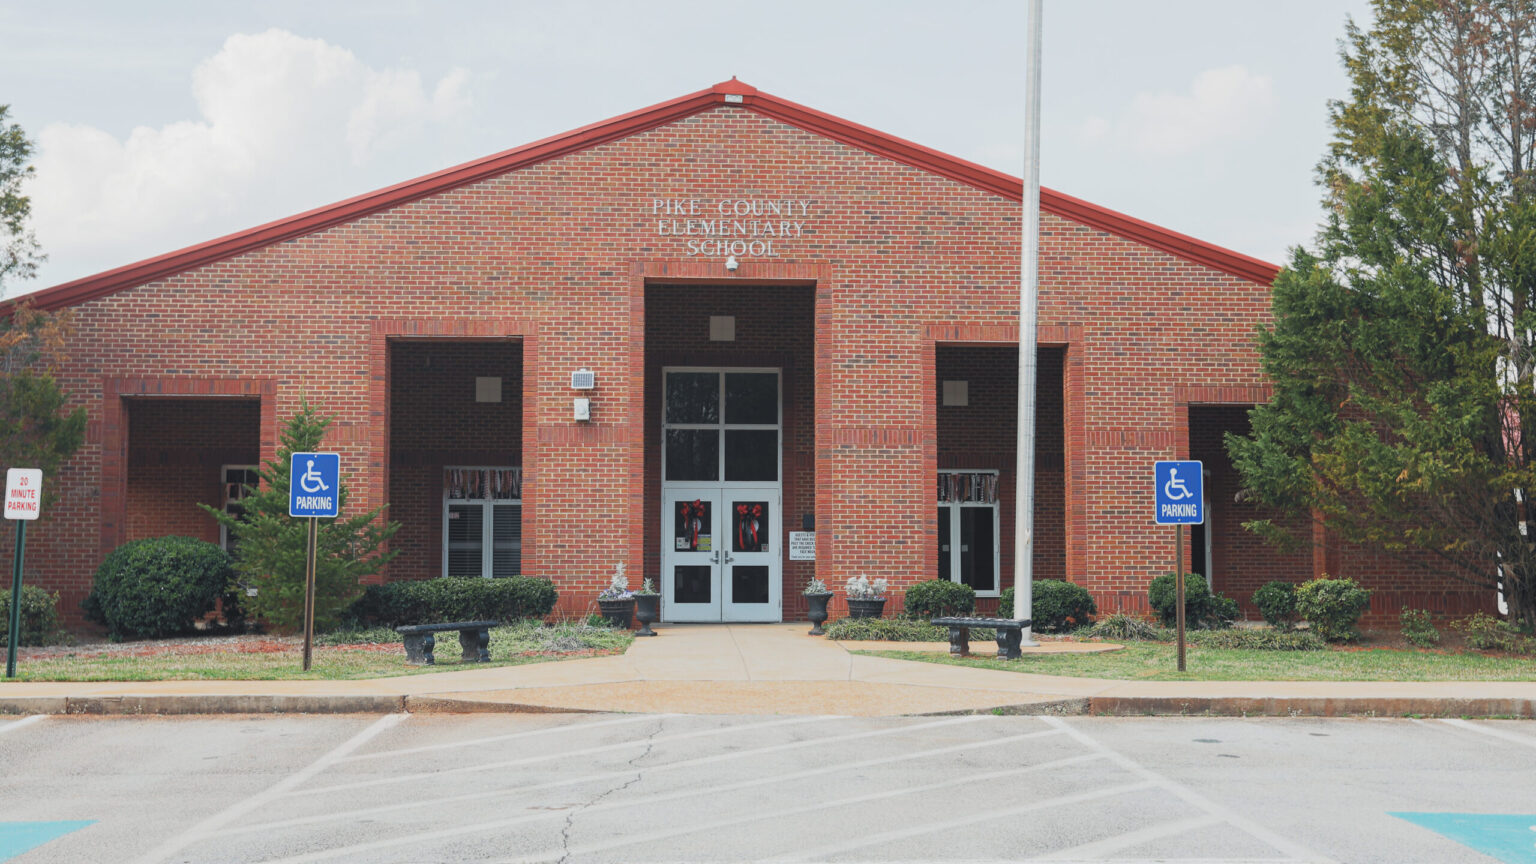 About us - Pike County Elementary School